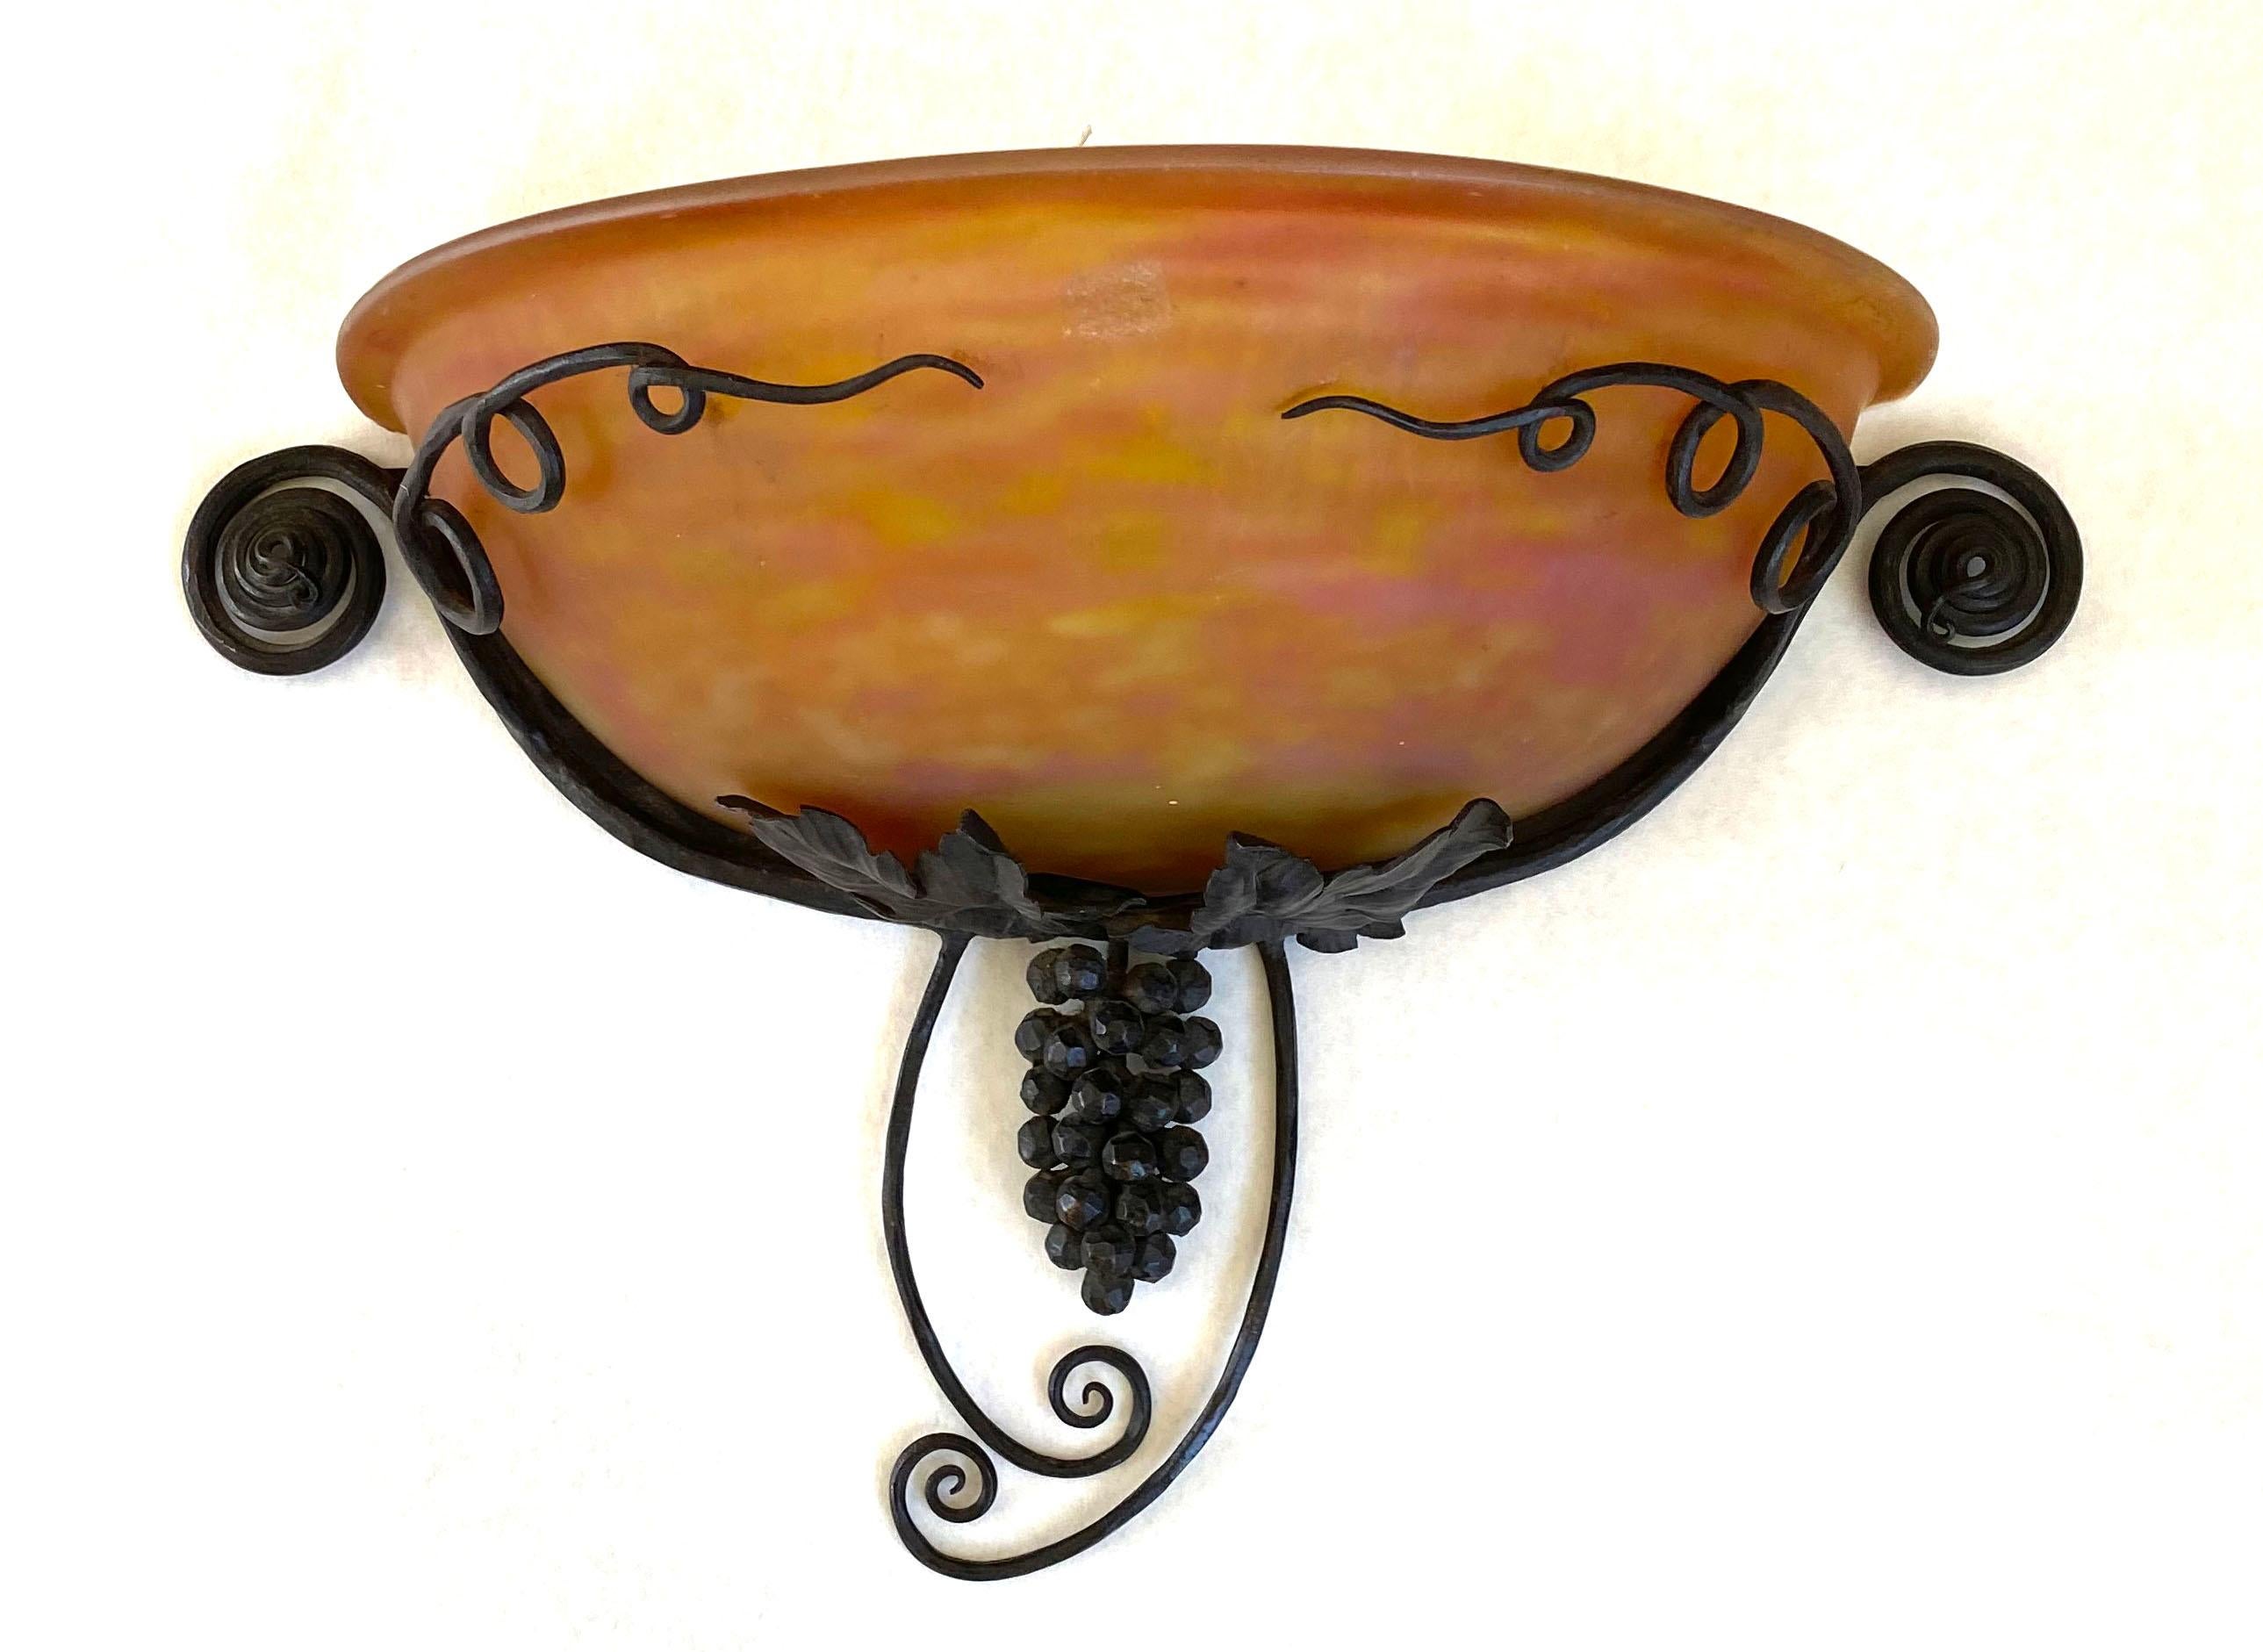 Art Deco wall sconce by Edgar Brandt.
Made of wrought iron with a glass shade by Daum (unsigned)
Measures: Depth 7